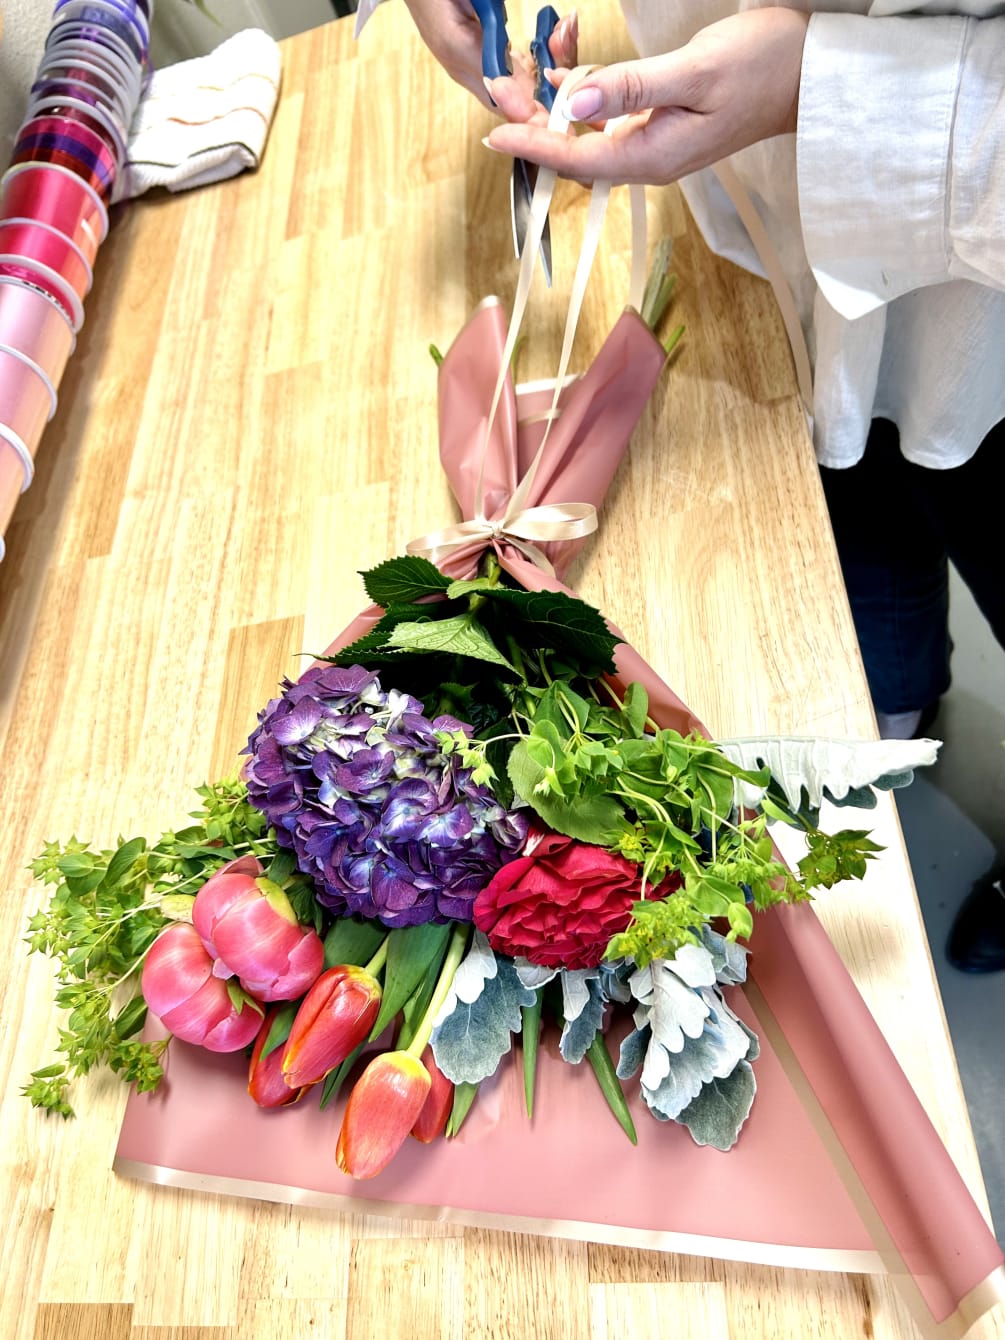 Our exquisite Bouquets showcase an exquisite variety of seasonal blossoms carefully selected